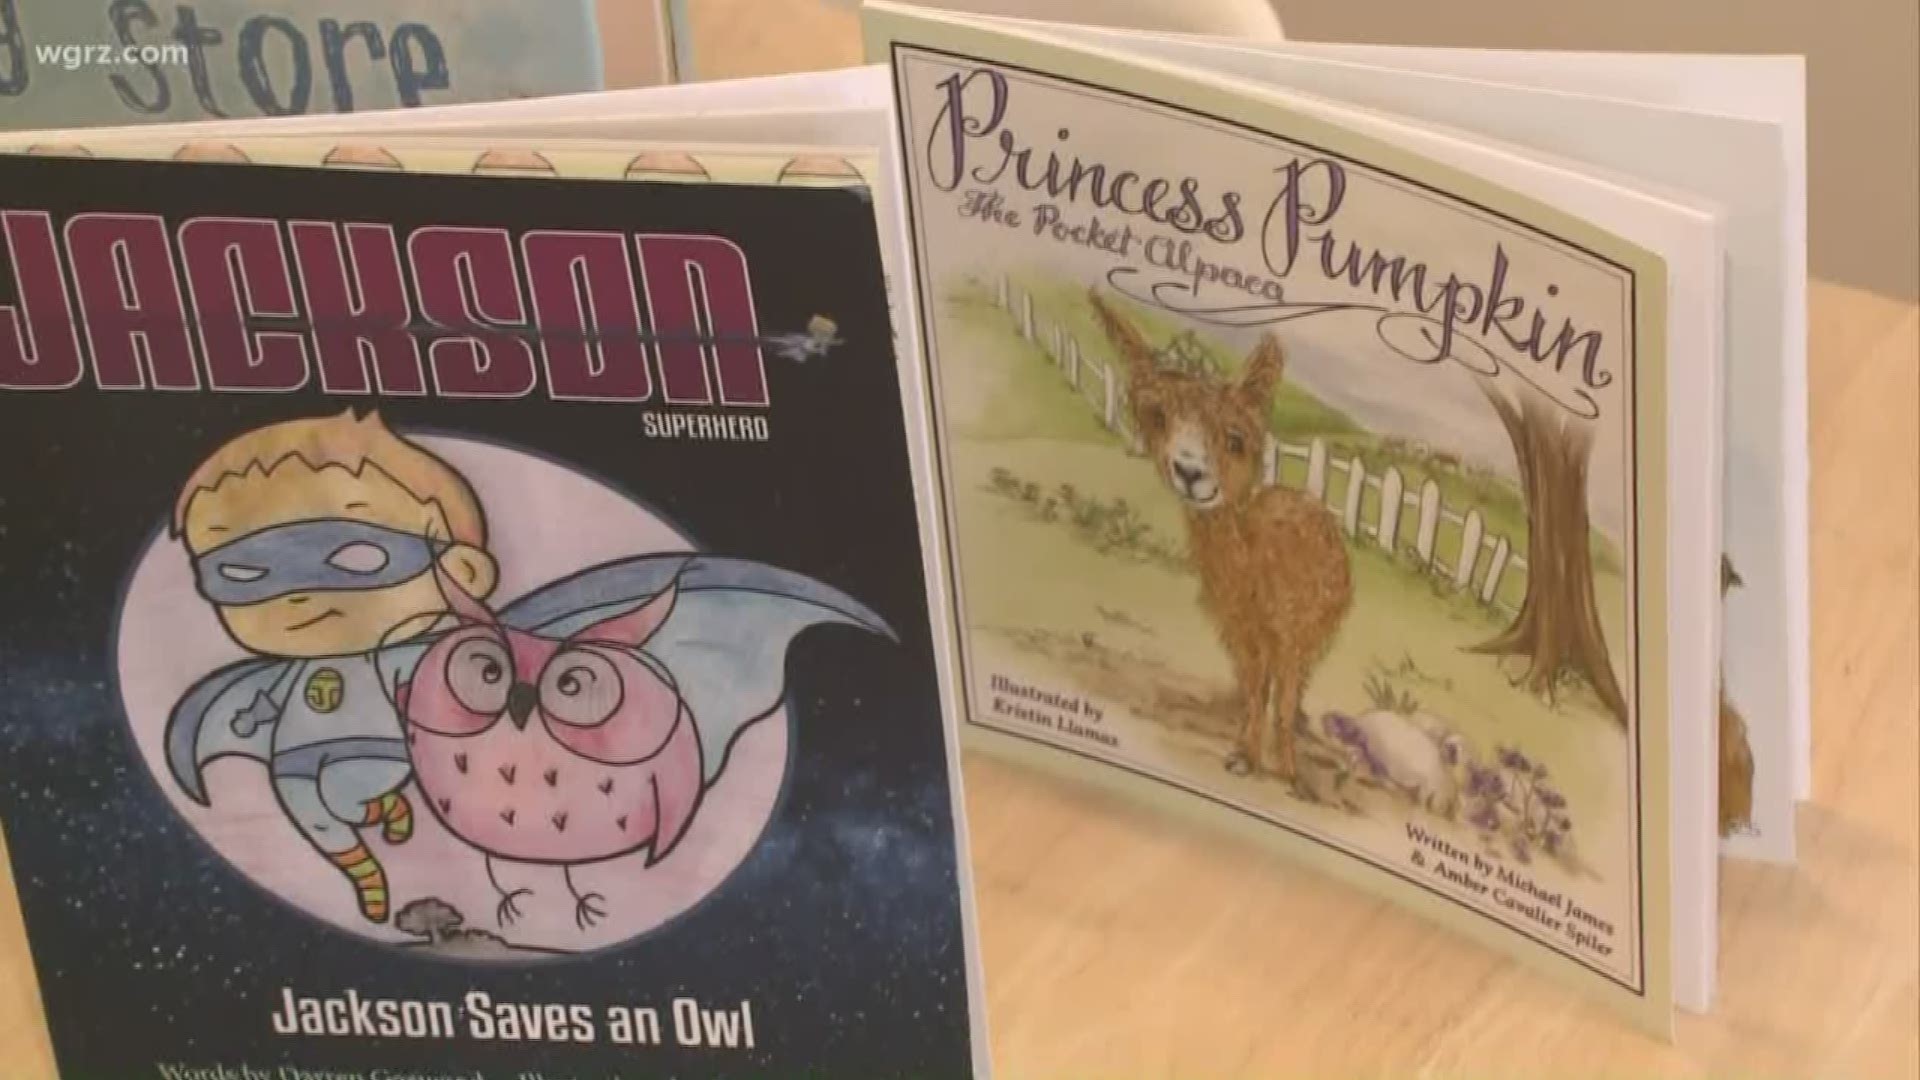 Children's author series coming to North Buffalo sleep store